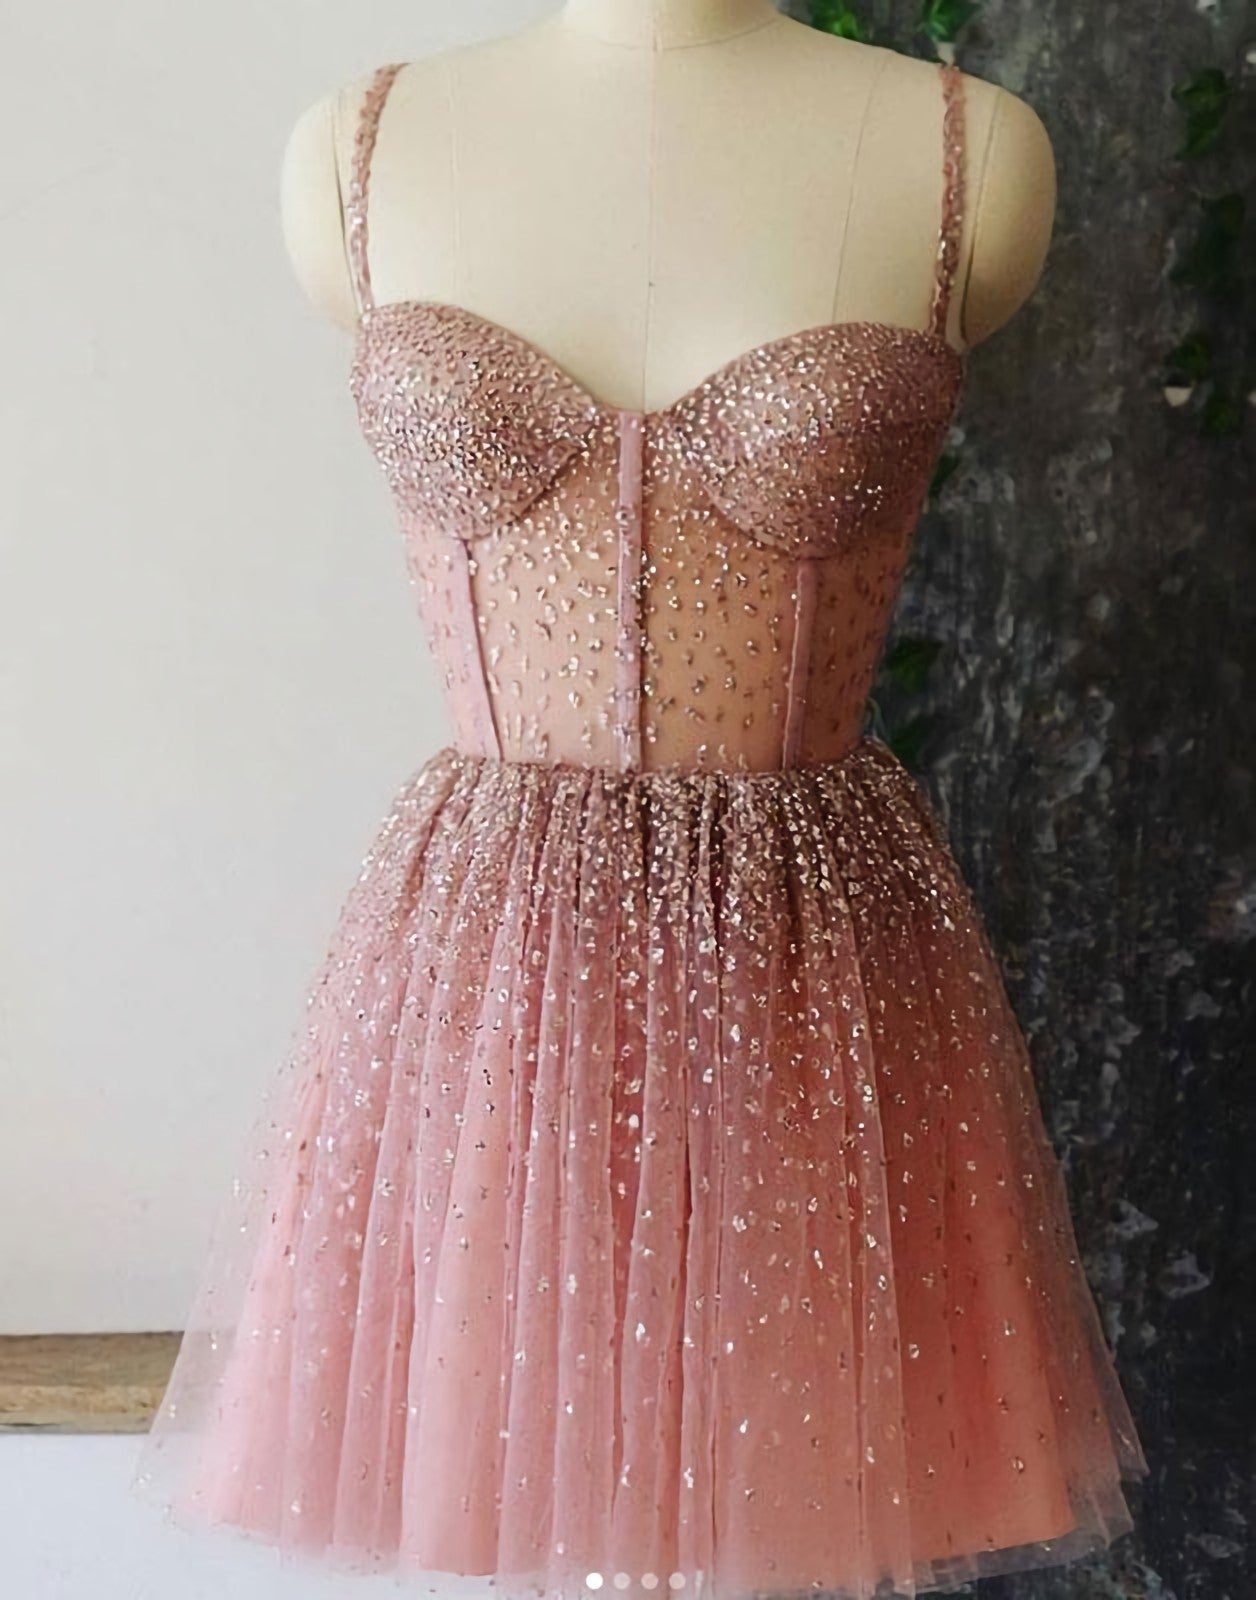 A Line Spaghetti Straps Short Dresses, Dusty Pink Beaded Corset Homecoming Dress outfit, Prom Dresses Long Beautiful